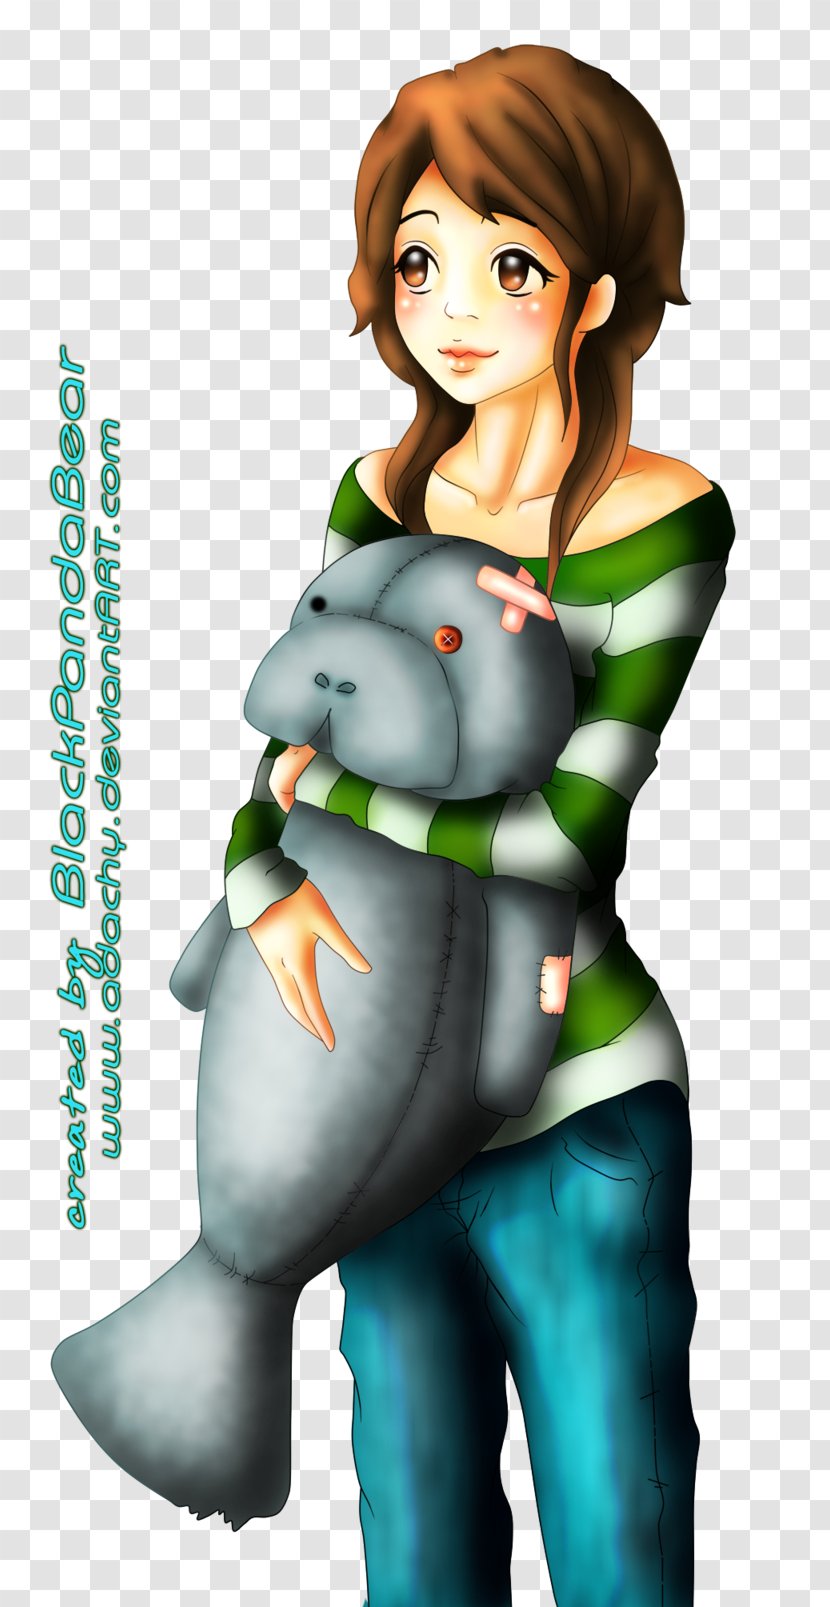 Child Cuteness Drawing West Indian Manatee Human - Heart - Manatees Transparent PNG